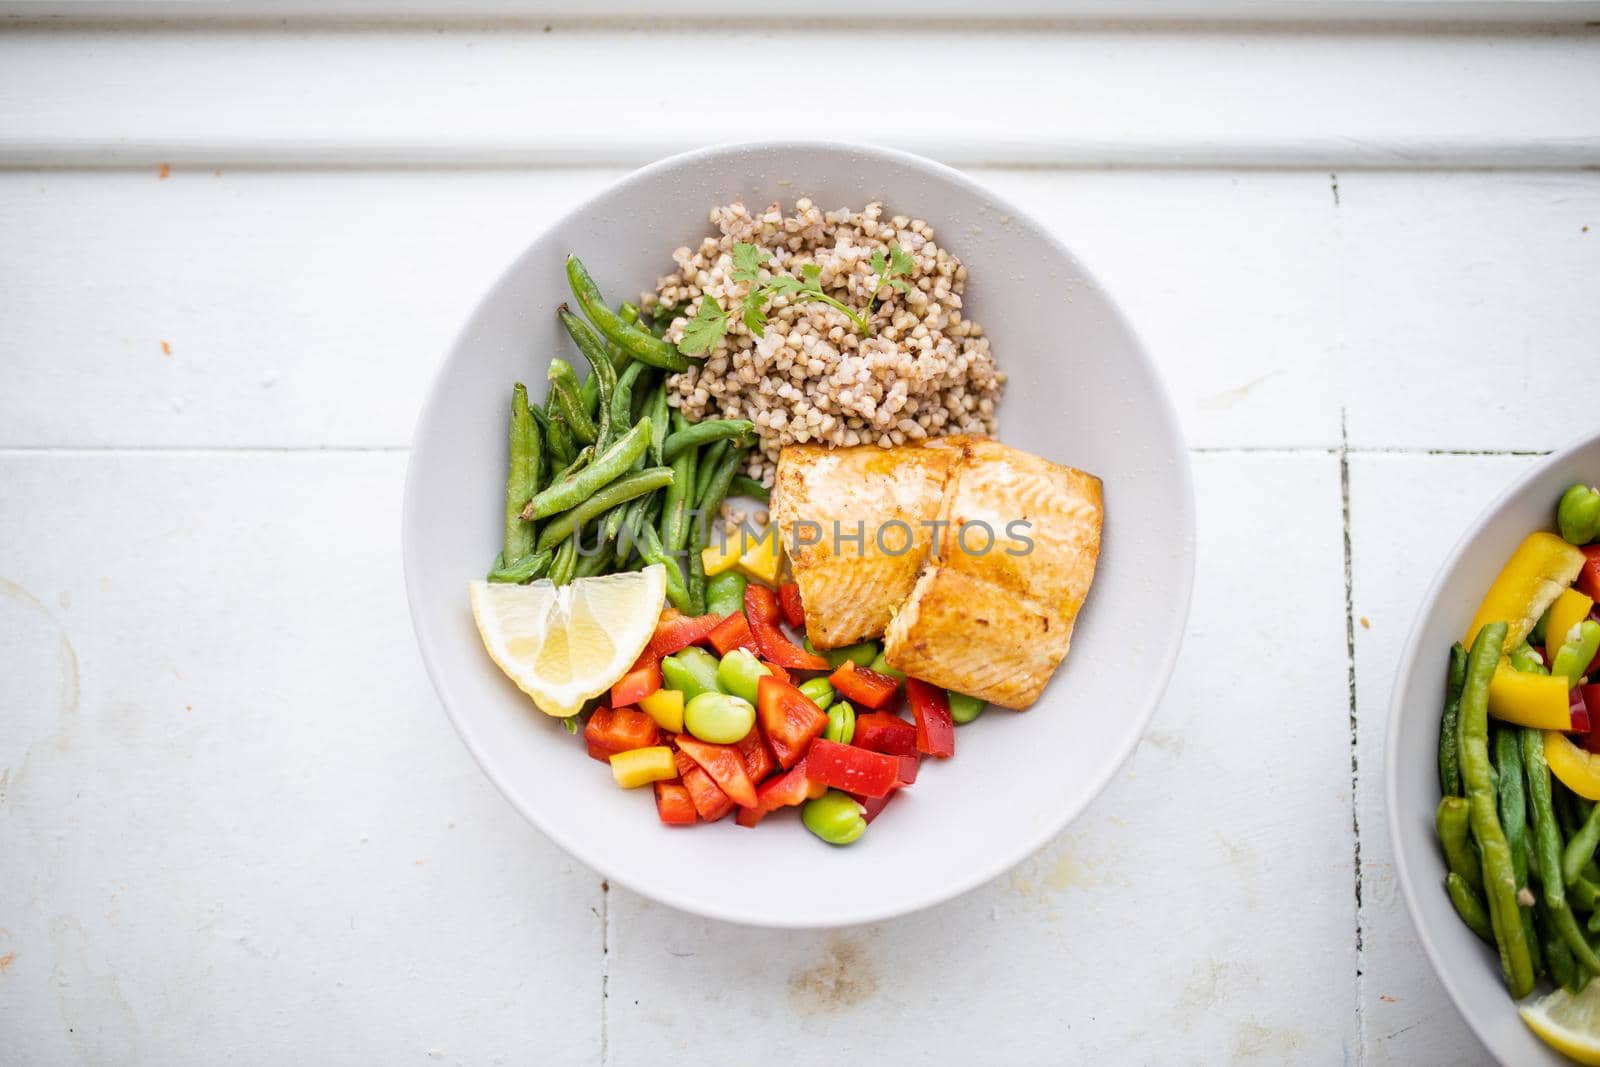 Salmon and buckwheat dish with green beans and tomato by Kanelbulle